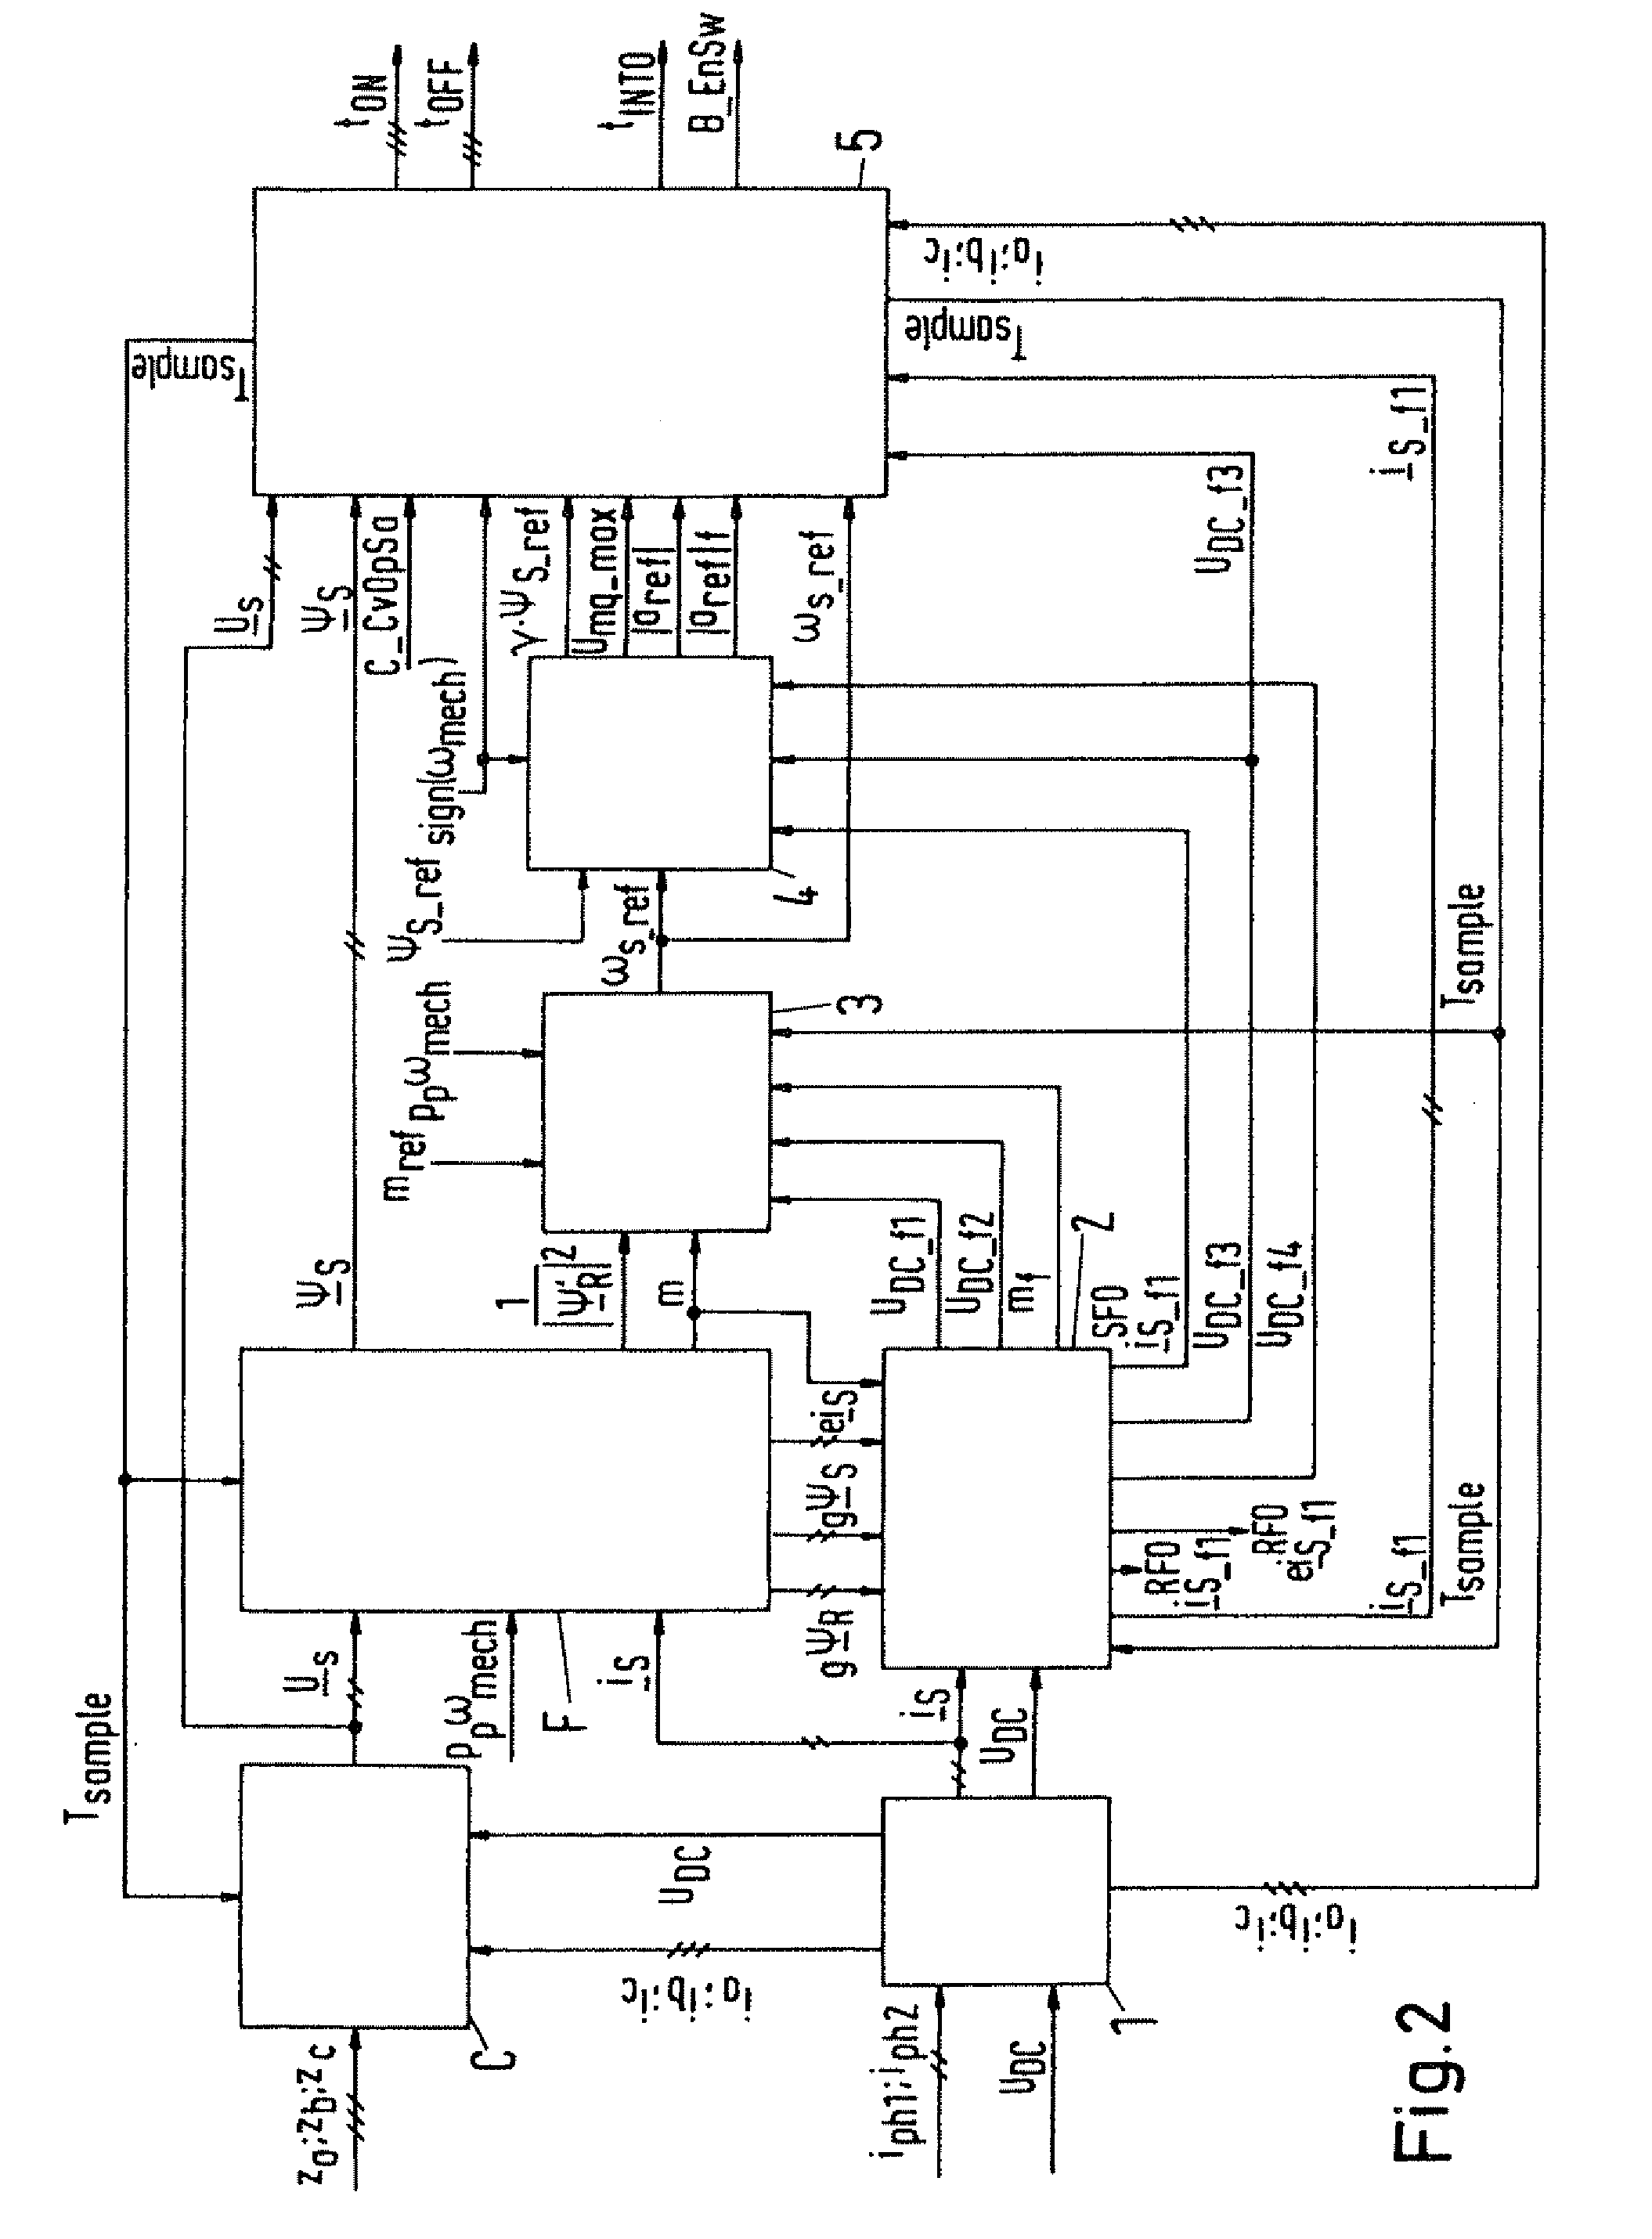 Open-loop and/or closed-loop control system of a 3-phase power converter for the operation of an asynchronous machine